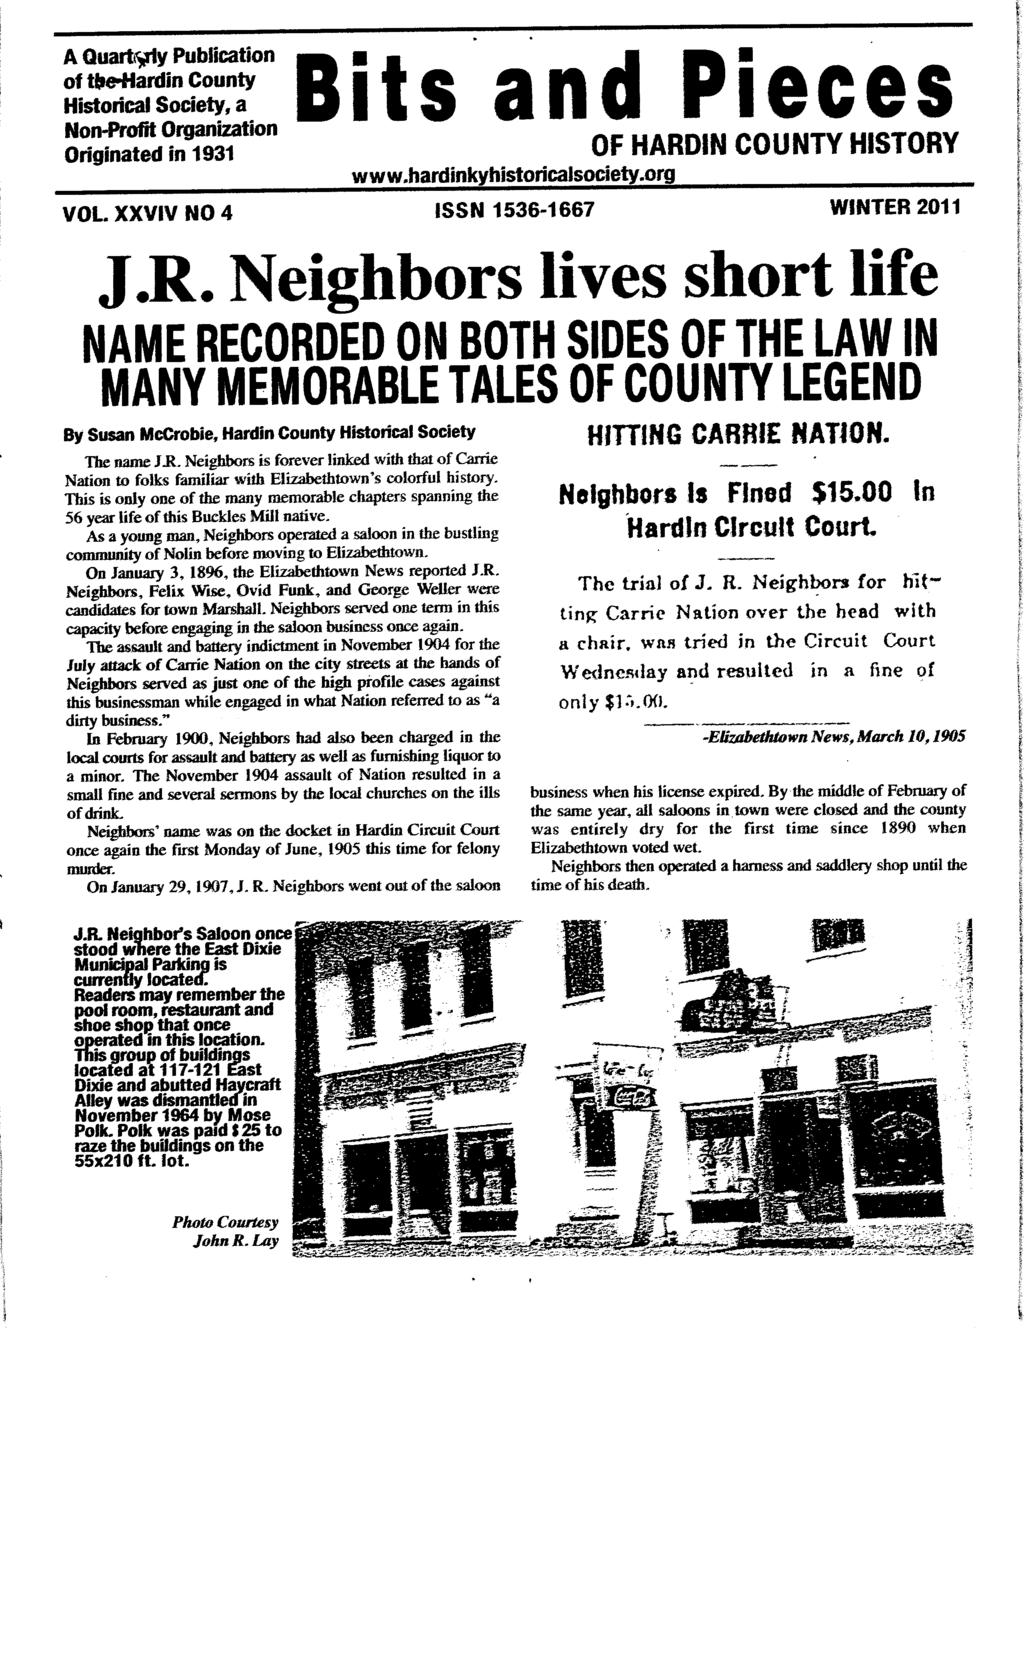 B of A Ouartr;rly tt e-hardin Publication County Historical Society, a Non-Profit Organization Originated in 1931. t 5 a n d p. e c e 5 OF HARDIN COUNTY HISTORY www.hardinkyhistoricalsociety.org VOL.